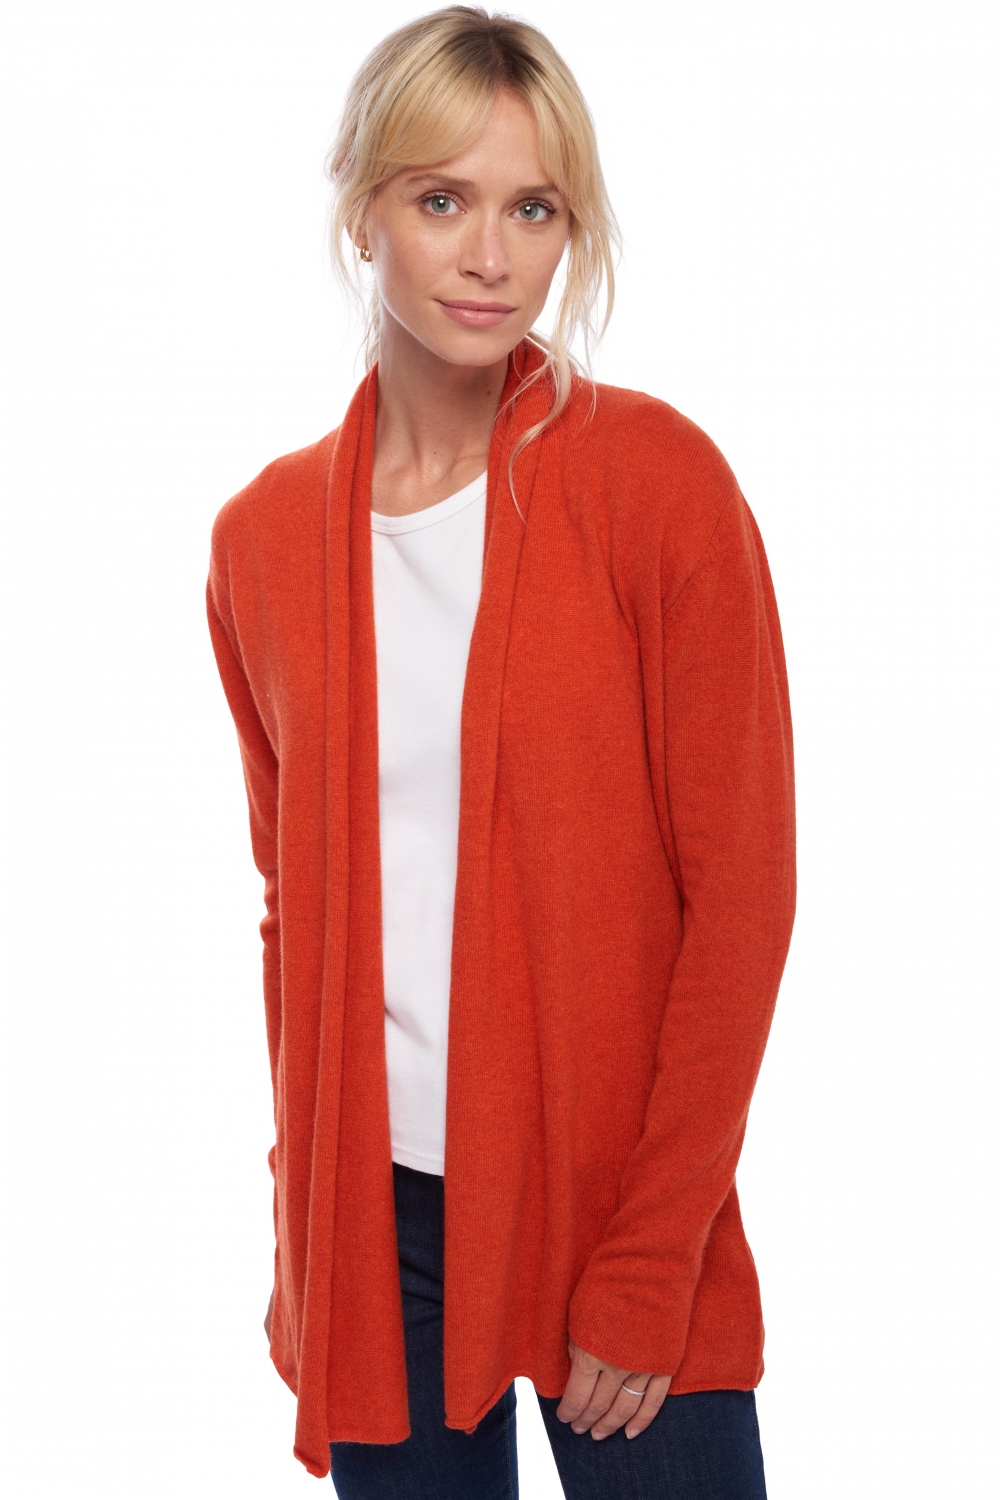 https://www.mahogany-cashmere.it/img/articles/zoom/Cashmere-cashmere-donna-cardigan-pucci-paprika-l--3612270442151.jpg